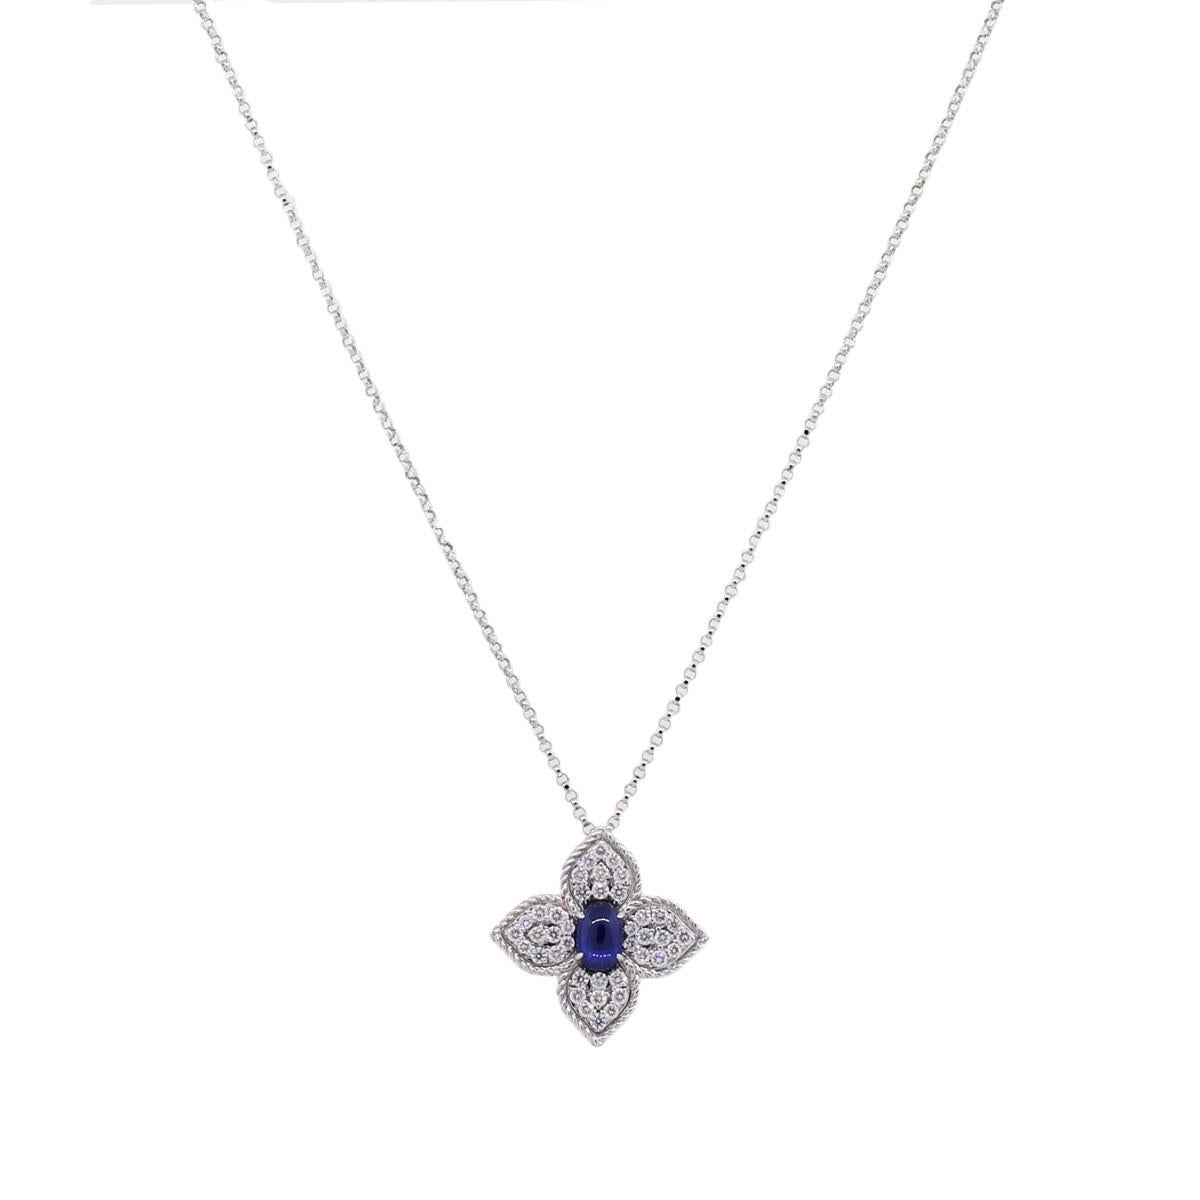 Material: 18k White Gold
Diamond Details: Approximately 0.44ctw of round brilliant diamonds. Diamonds are G in color, VS in clarity
Gemstone Details: Oval shape cabochon sapphire measuring approximately 5.77mm x 3.40mm, approx. 0.50ct
Pendant